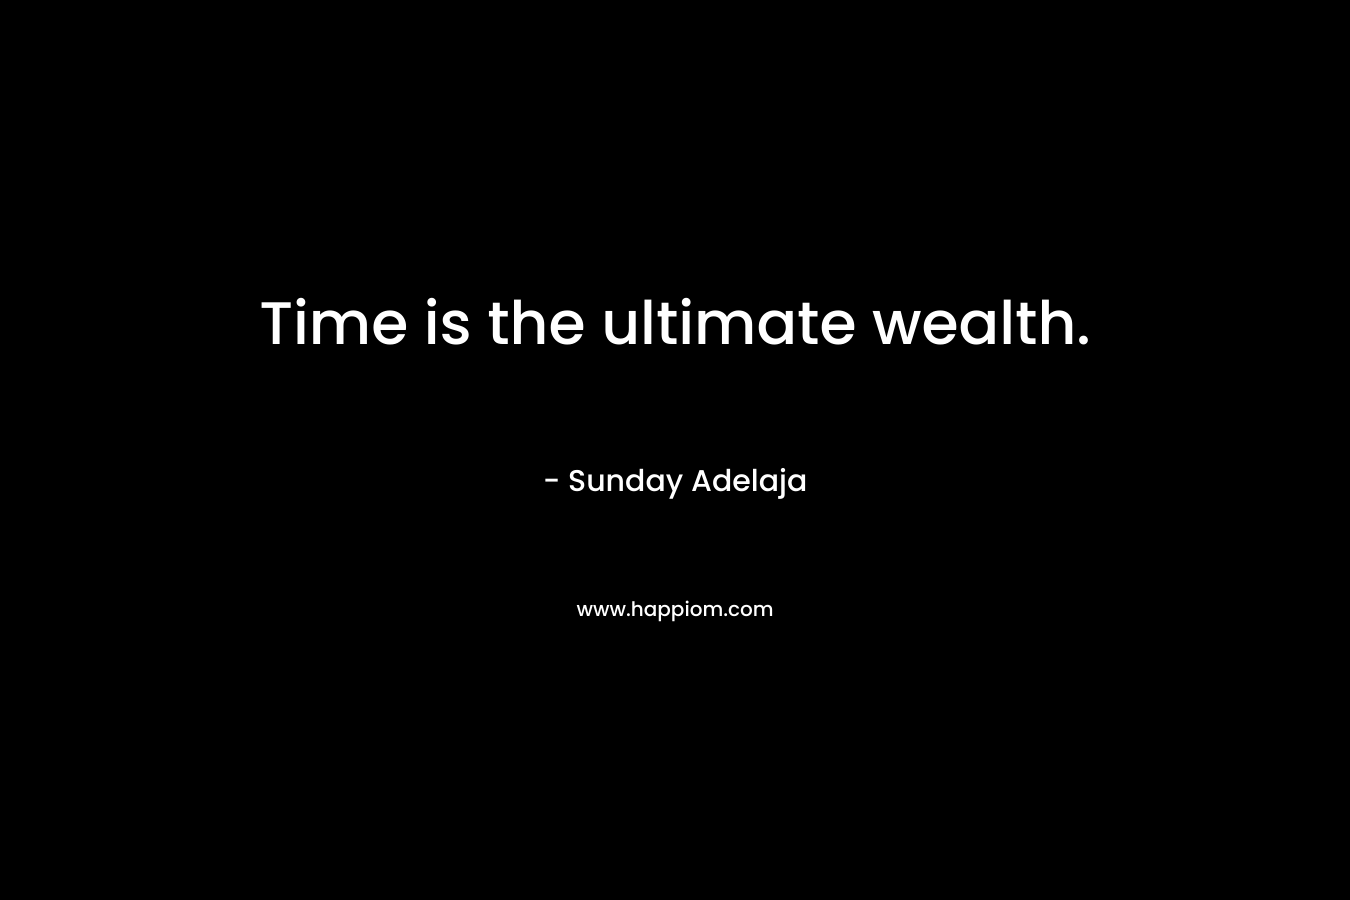 Time is the ultimate wealth.